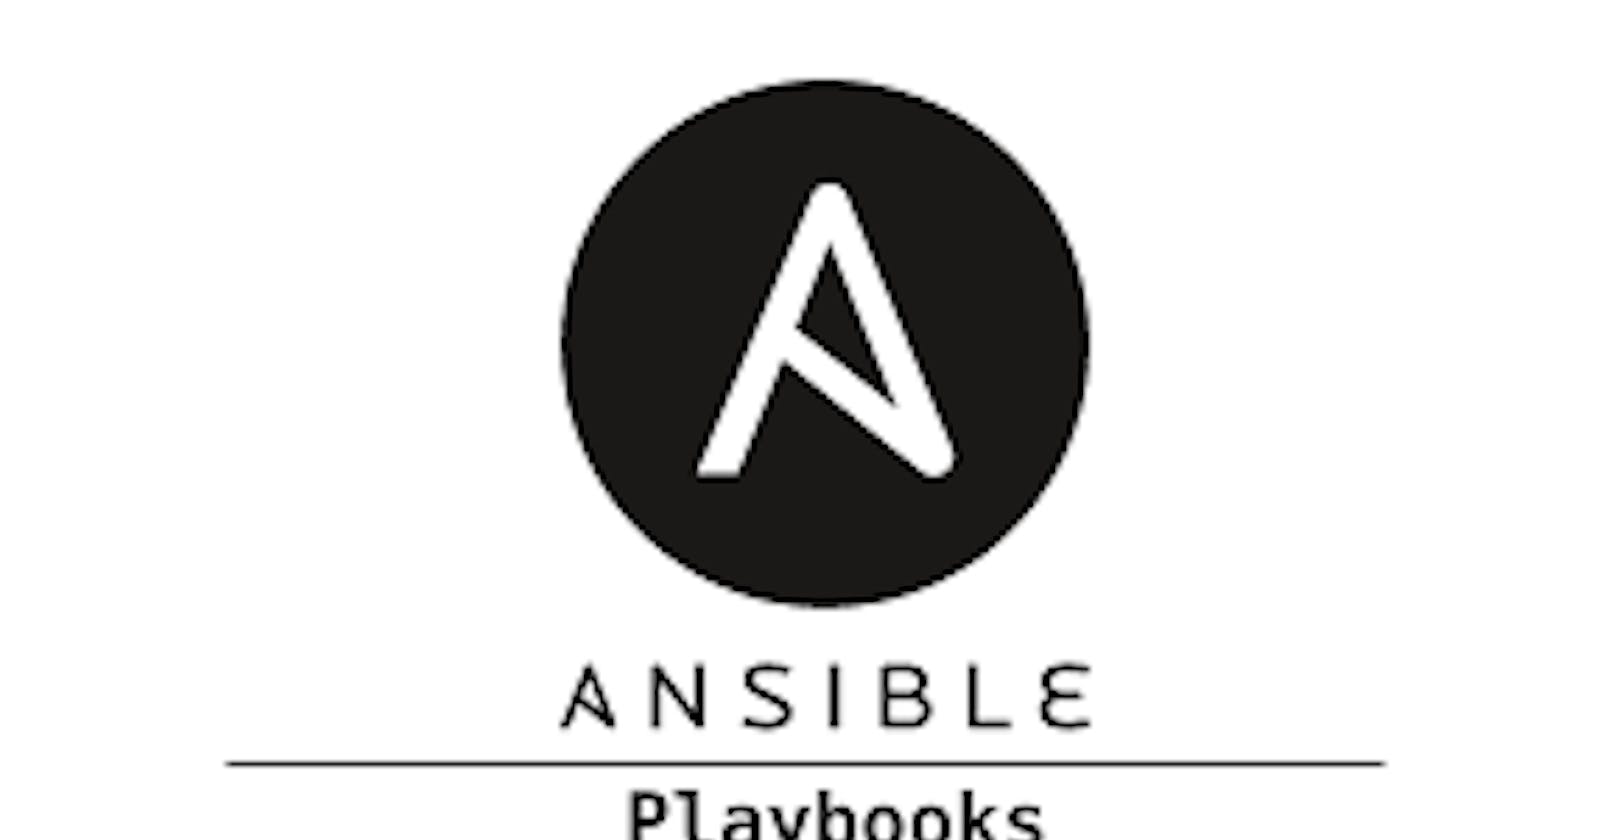 Day 58 - Ansible Playbooks